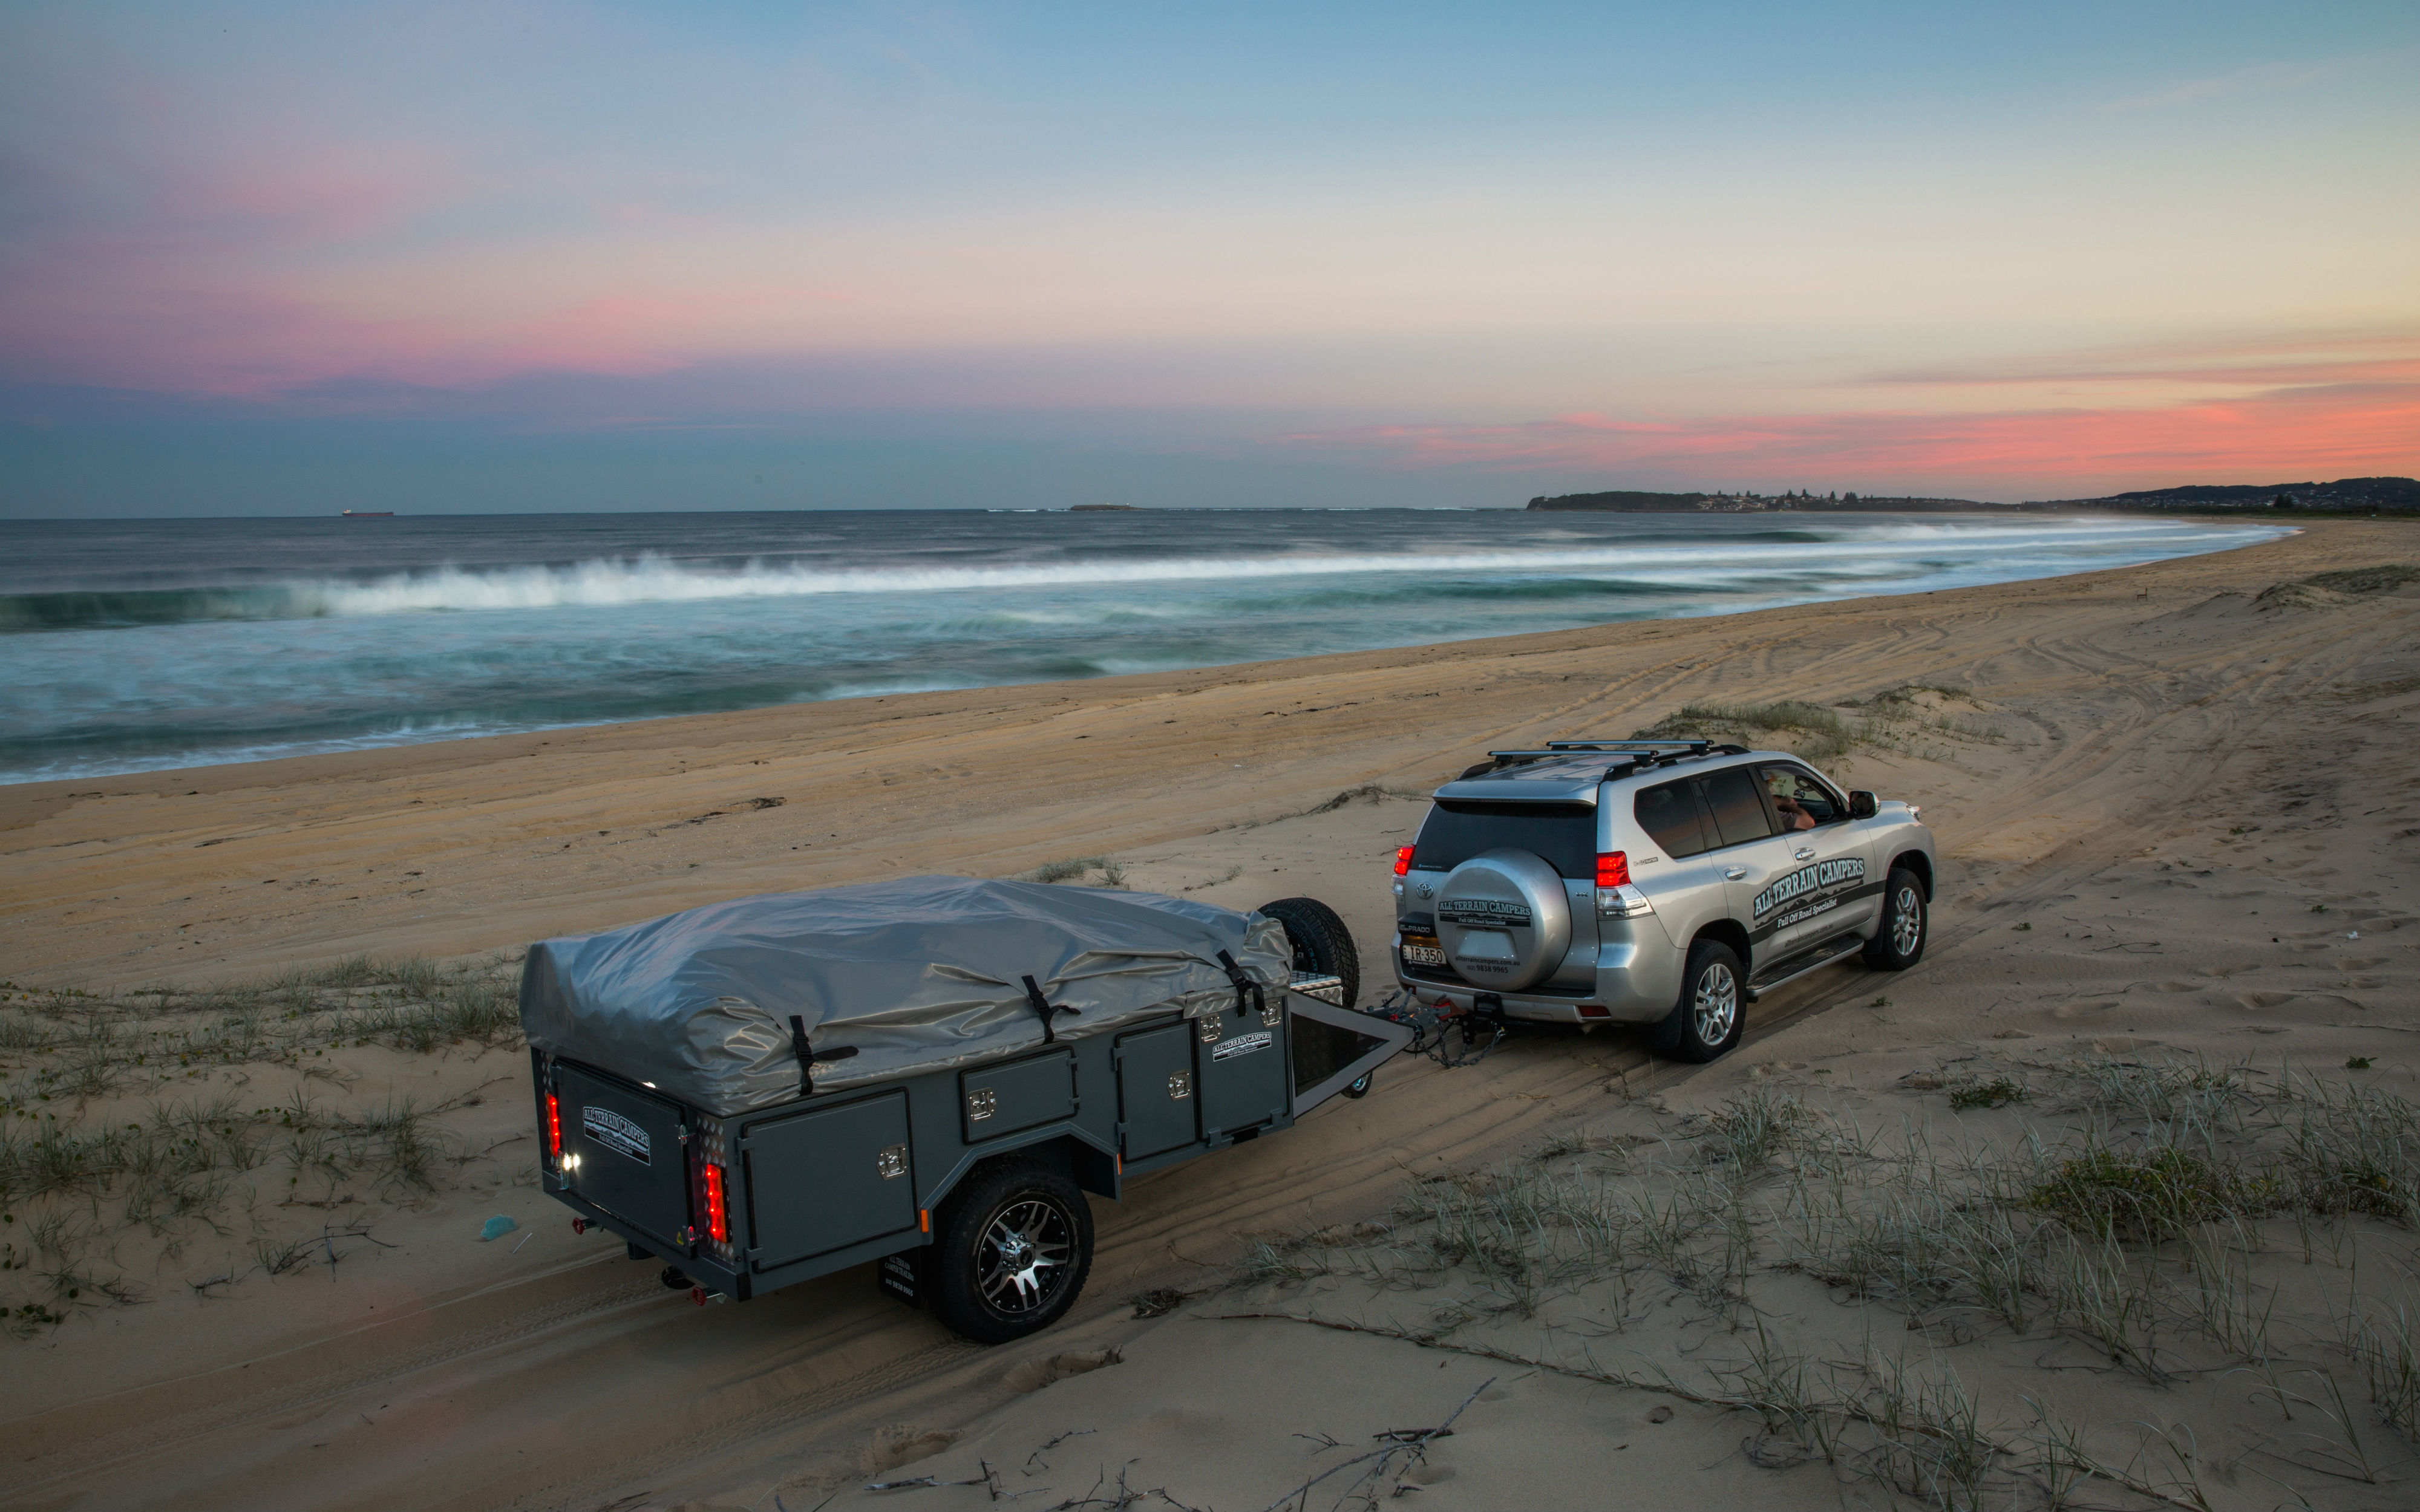 4WD towning a trailer on the beach during dusk